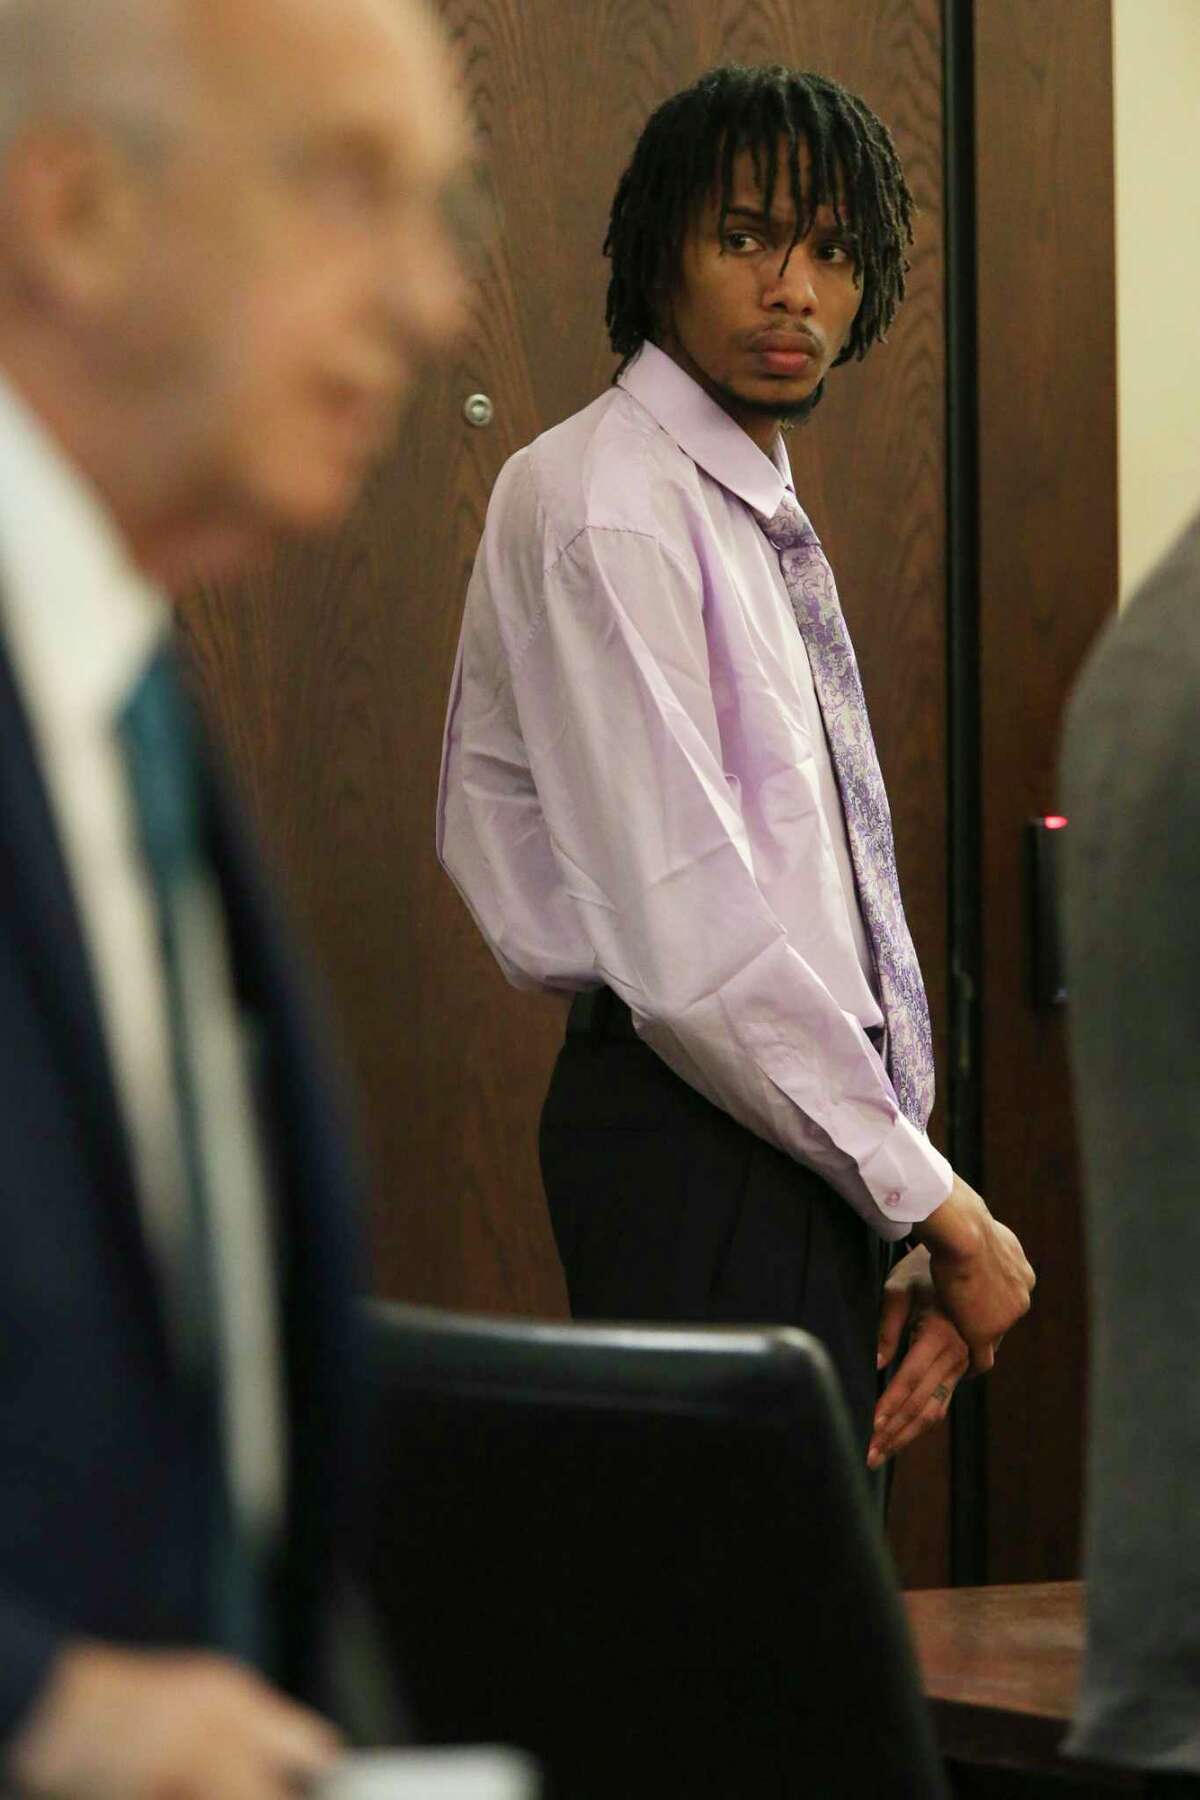 Joseph Alvarado looks around during a break in his capital murder trial in the Bexar County 290th State District Court, Tuesday, Aug. 27, 2019. Alvarado is accused of killing Tarik Ross, 21, in a robbery that went wrong on March 3, 2018.